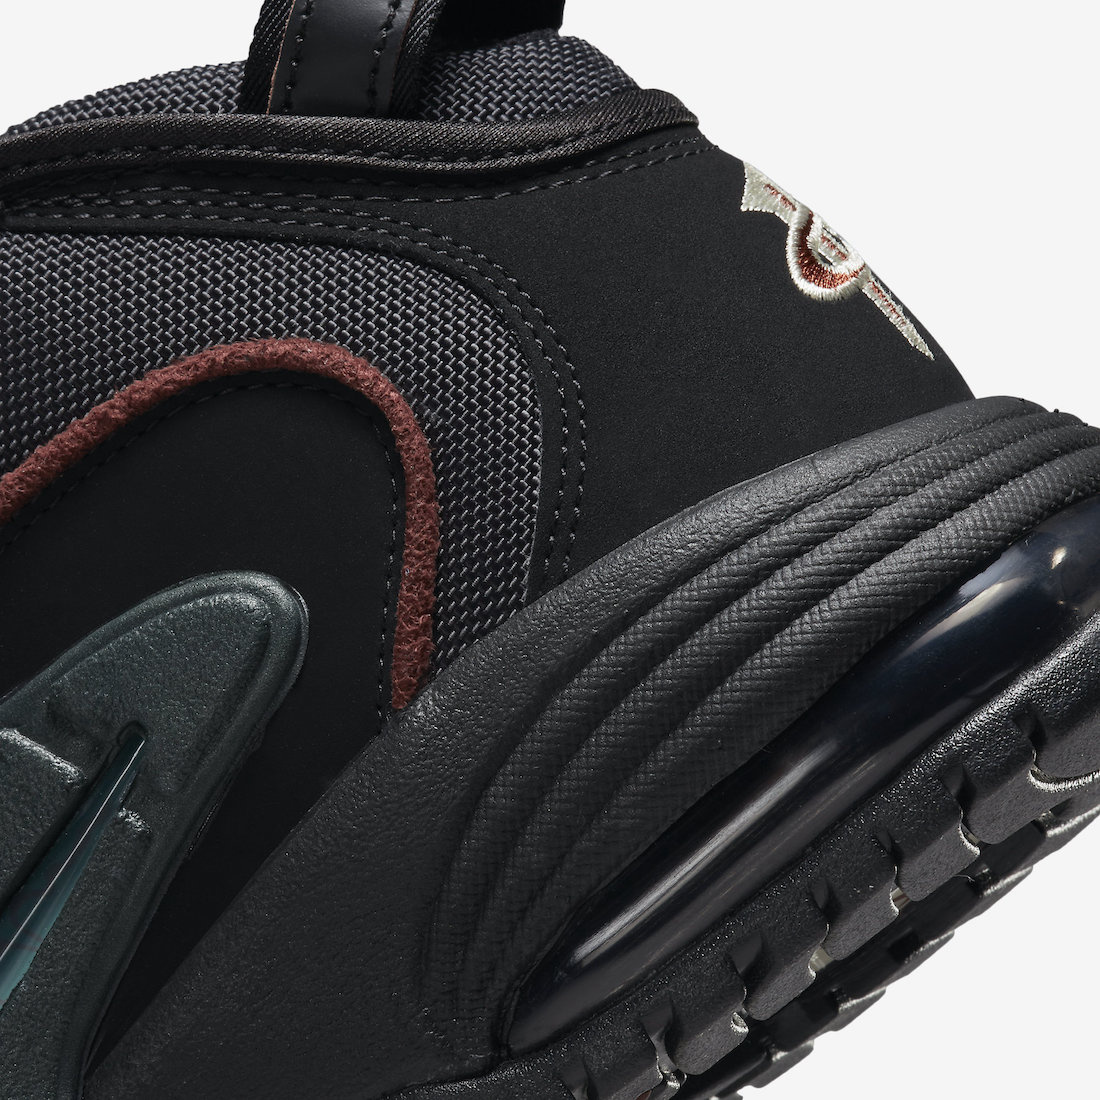 Nike Air Max Penny 1 Faded Spruce DV7442-001 Release Date